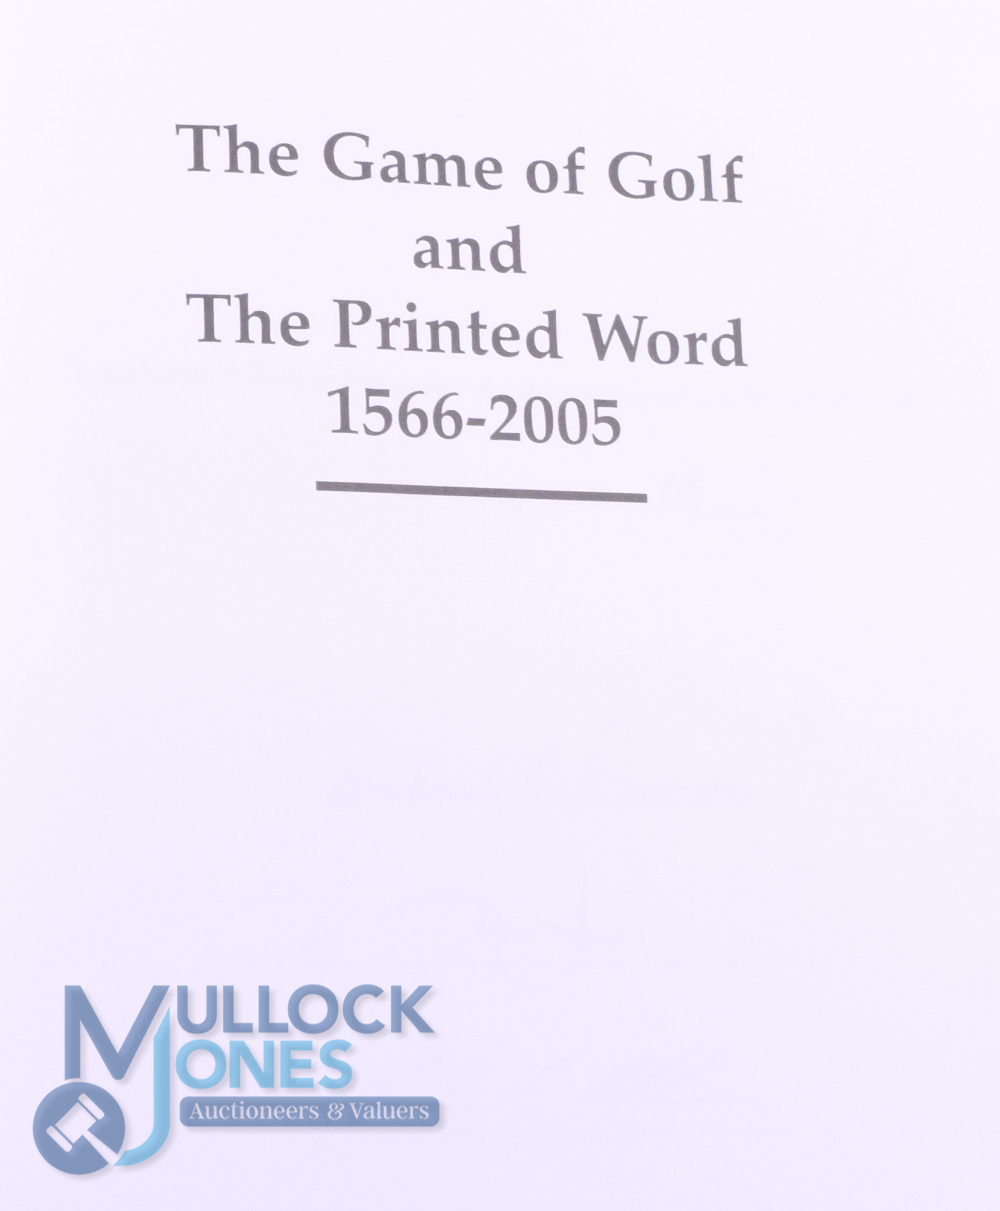 The Game of Golf and the Printed Word: 1566-2005 Donovan, Richard E and Rand Jerris, published by - Image 2 of 3